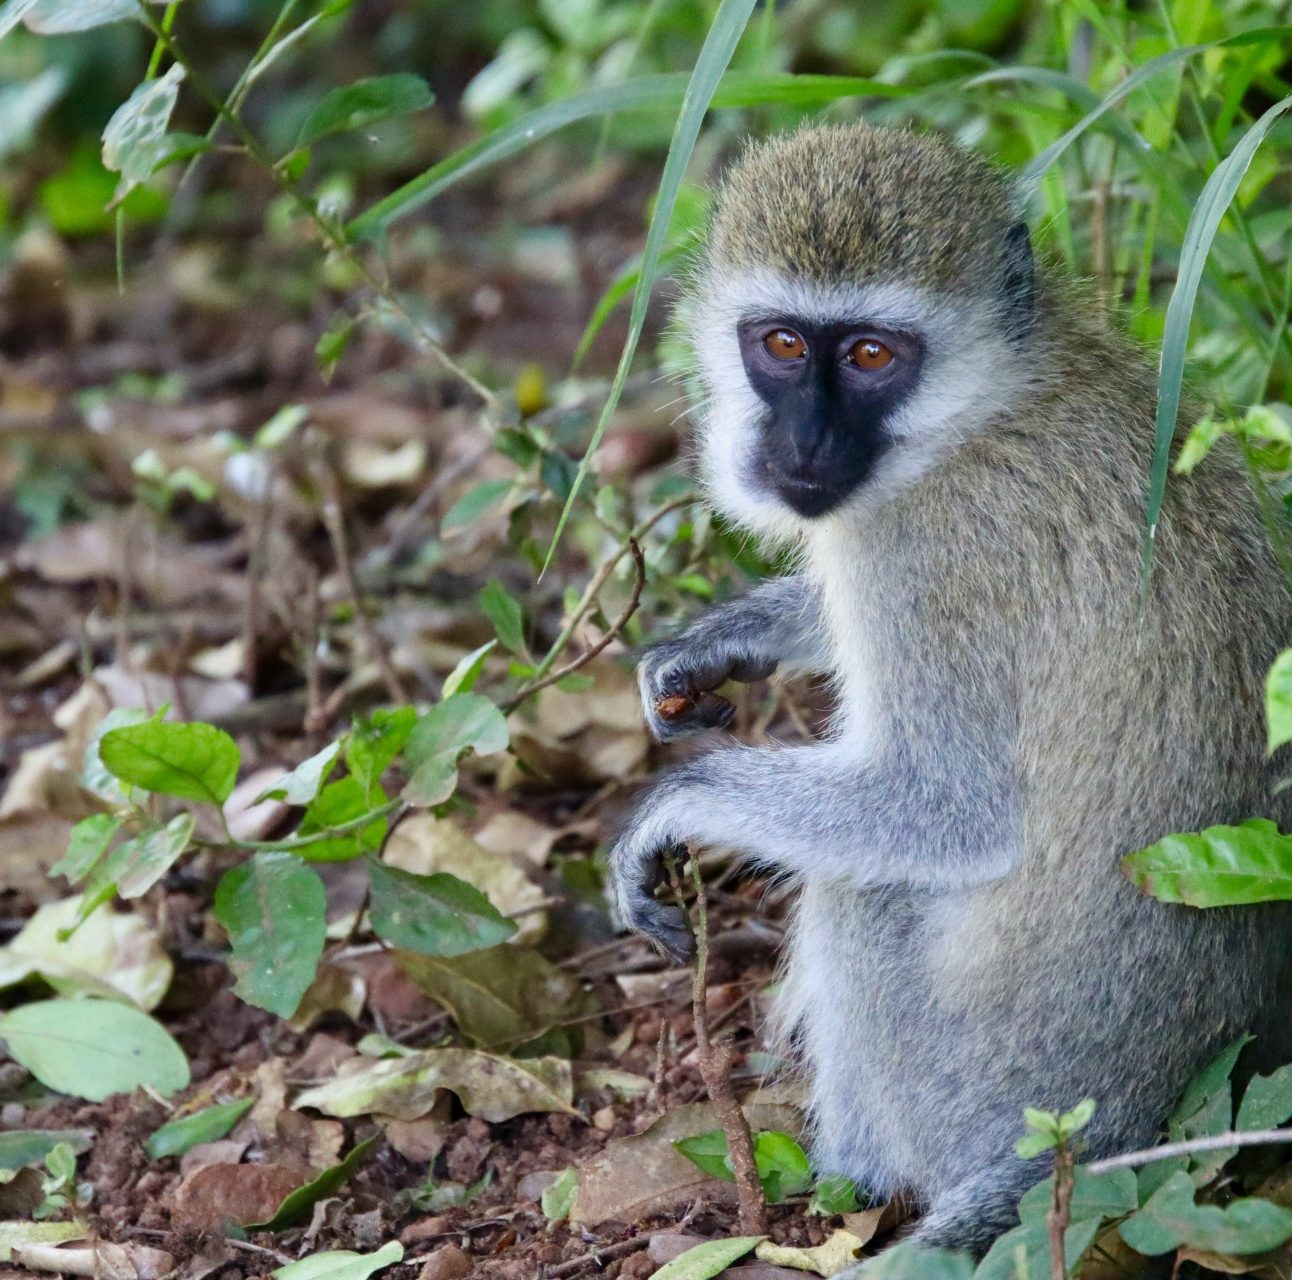 A young vervet monkey sitting on the forest floor